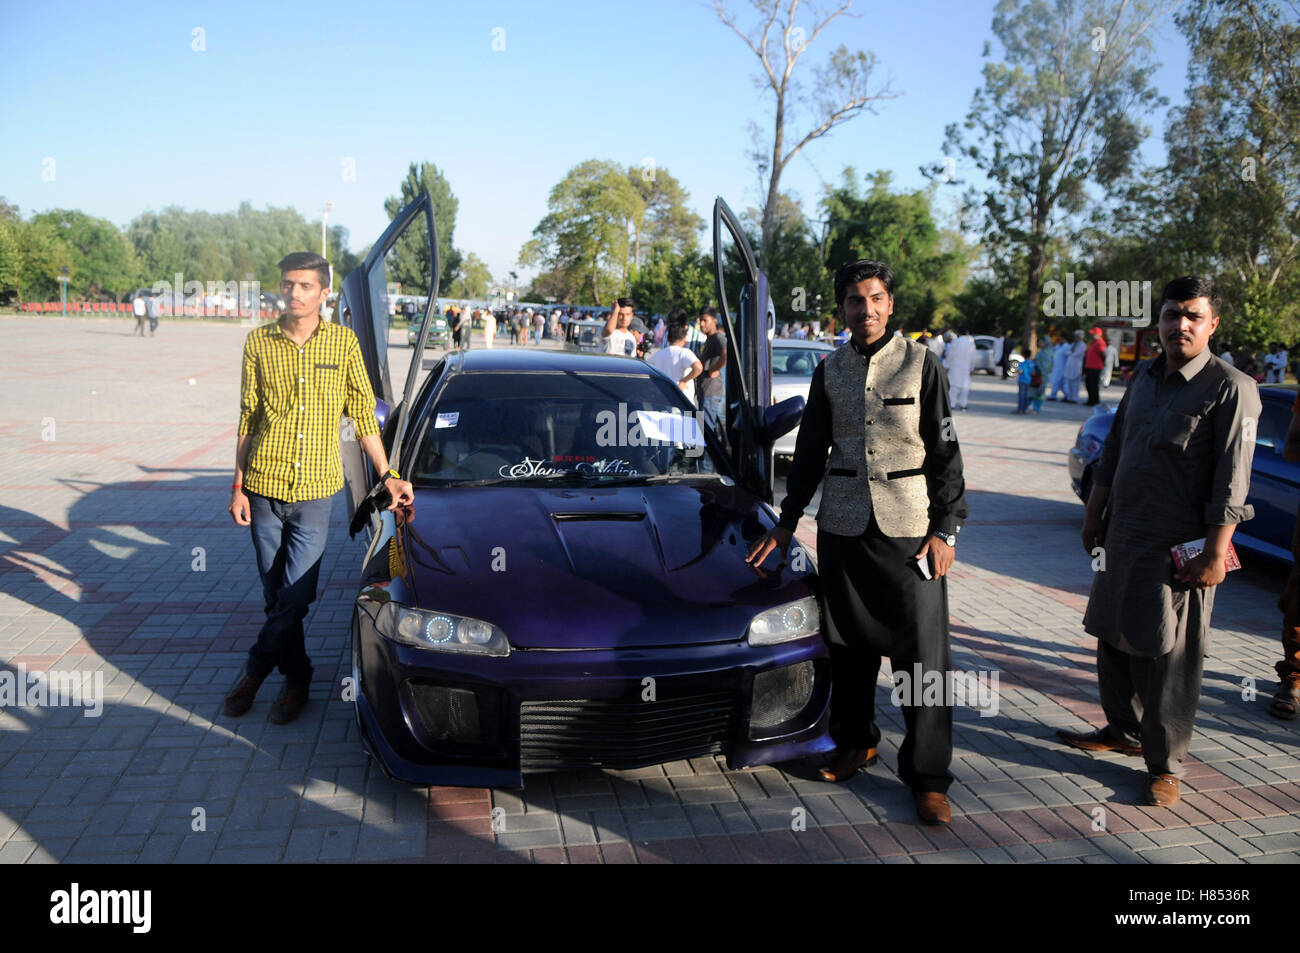 Rawalpindi, Pakistan. 9th Nov, 2016. People take photos with a car displayed on the RCCI Auto Show 2016 in Rawalpindi, Pakistan, Nov. 9, 2016. The auto show, held by Rawalpindi Chamber of Commerce and Industry, made a static display of more than 200 exclusive vehicles. © Ahmad Kamal/Xinhua/Alamy Live News Stock Photo